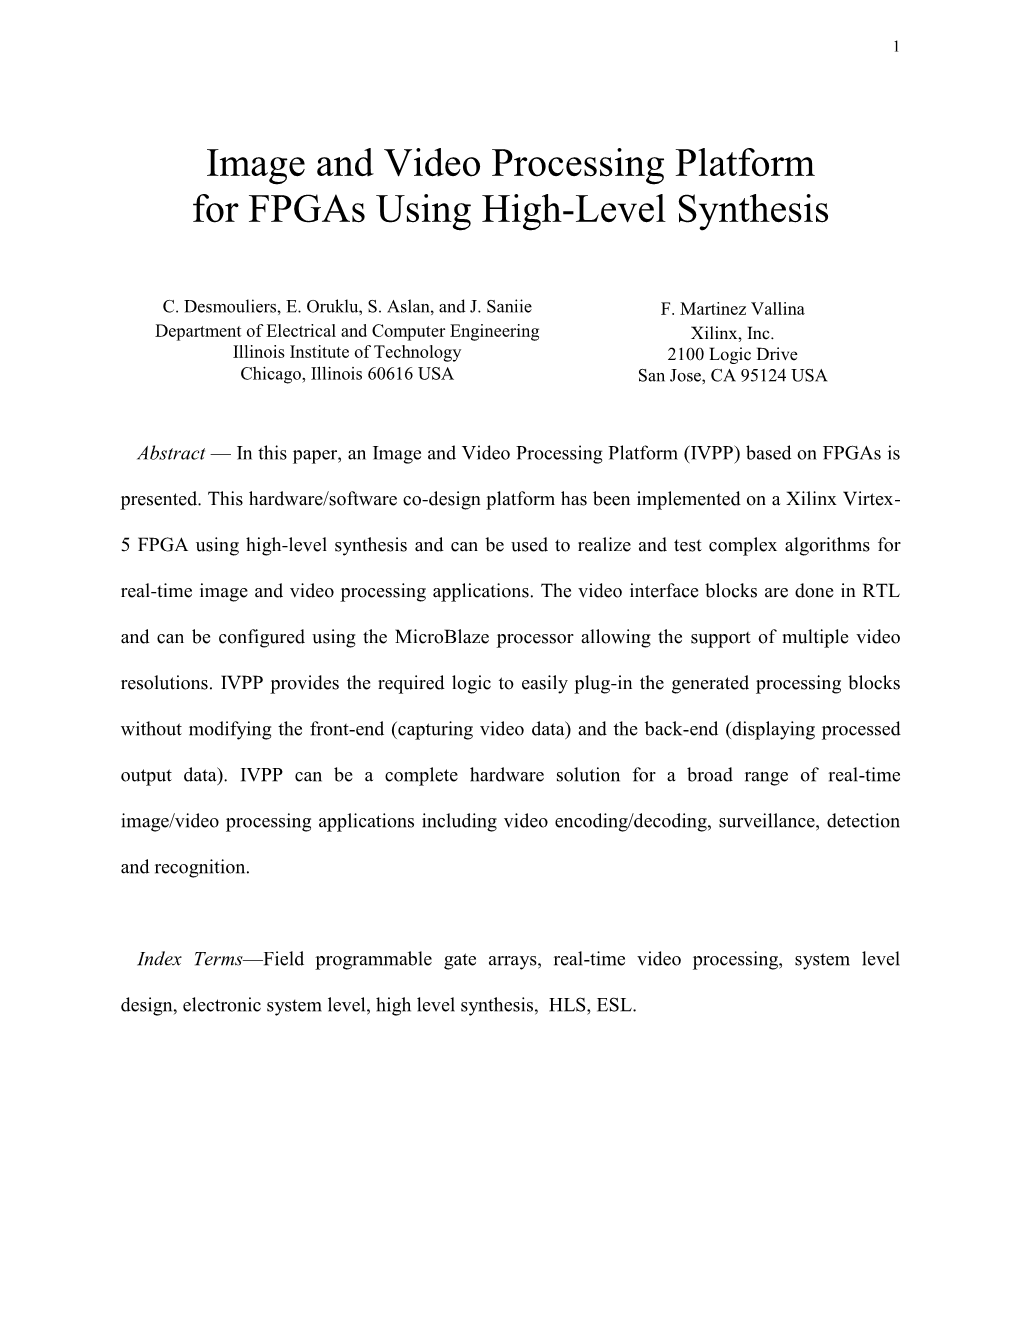 Image and Video Processing Platform for Fpgas Using High-Level Synthesis